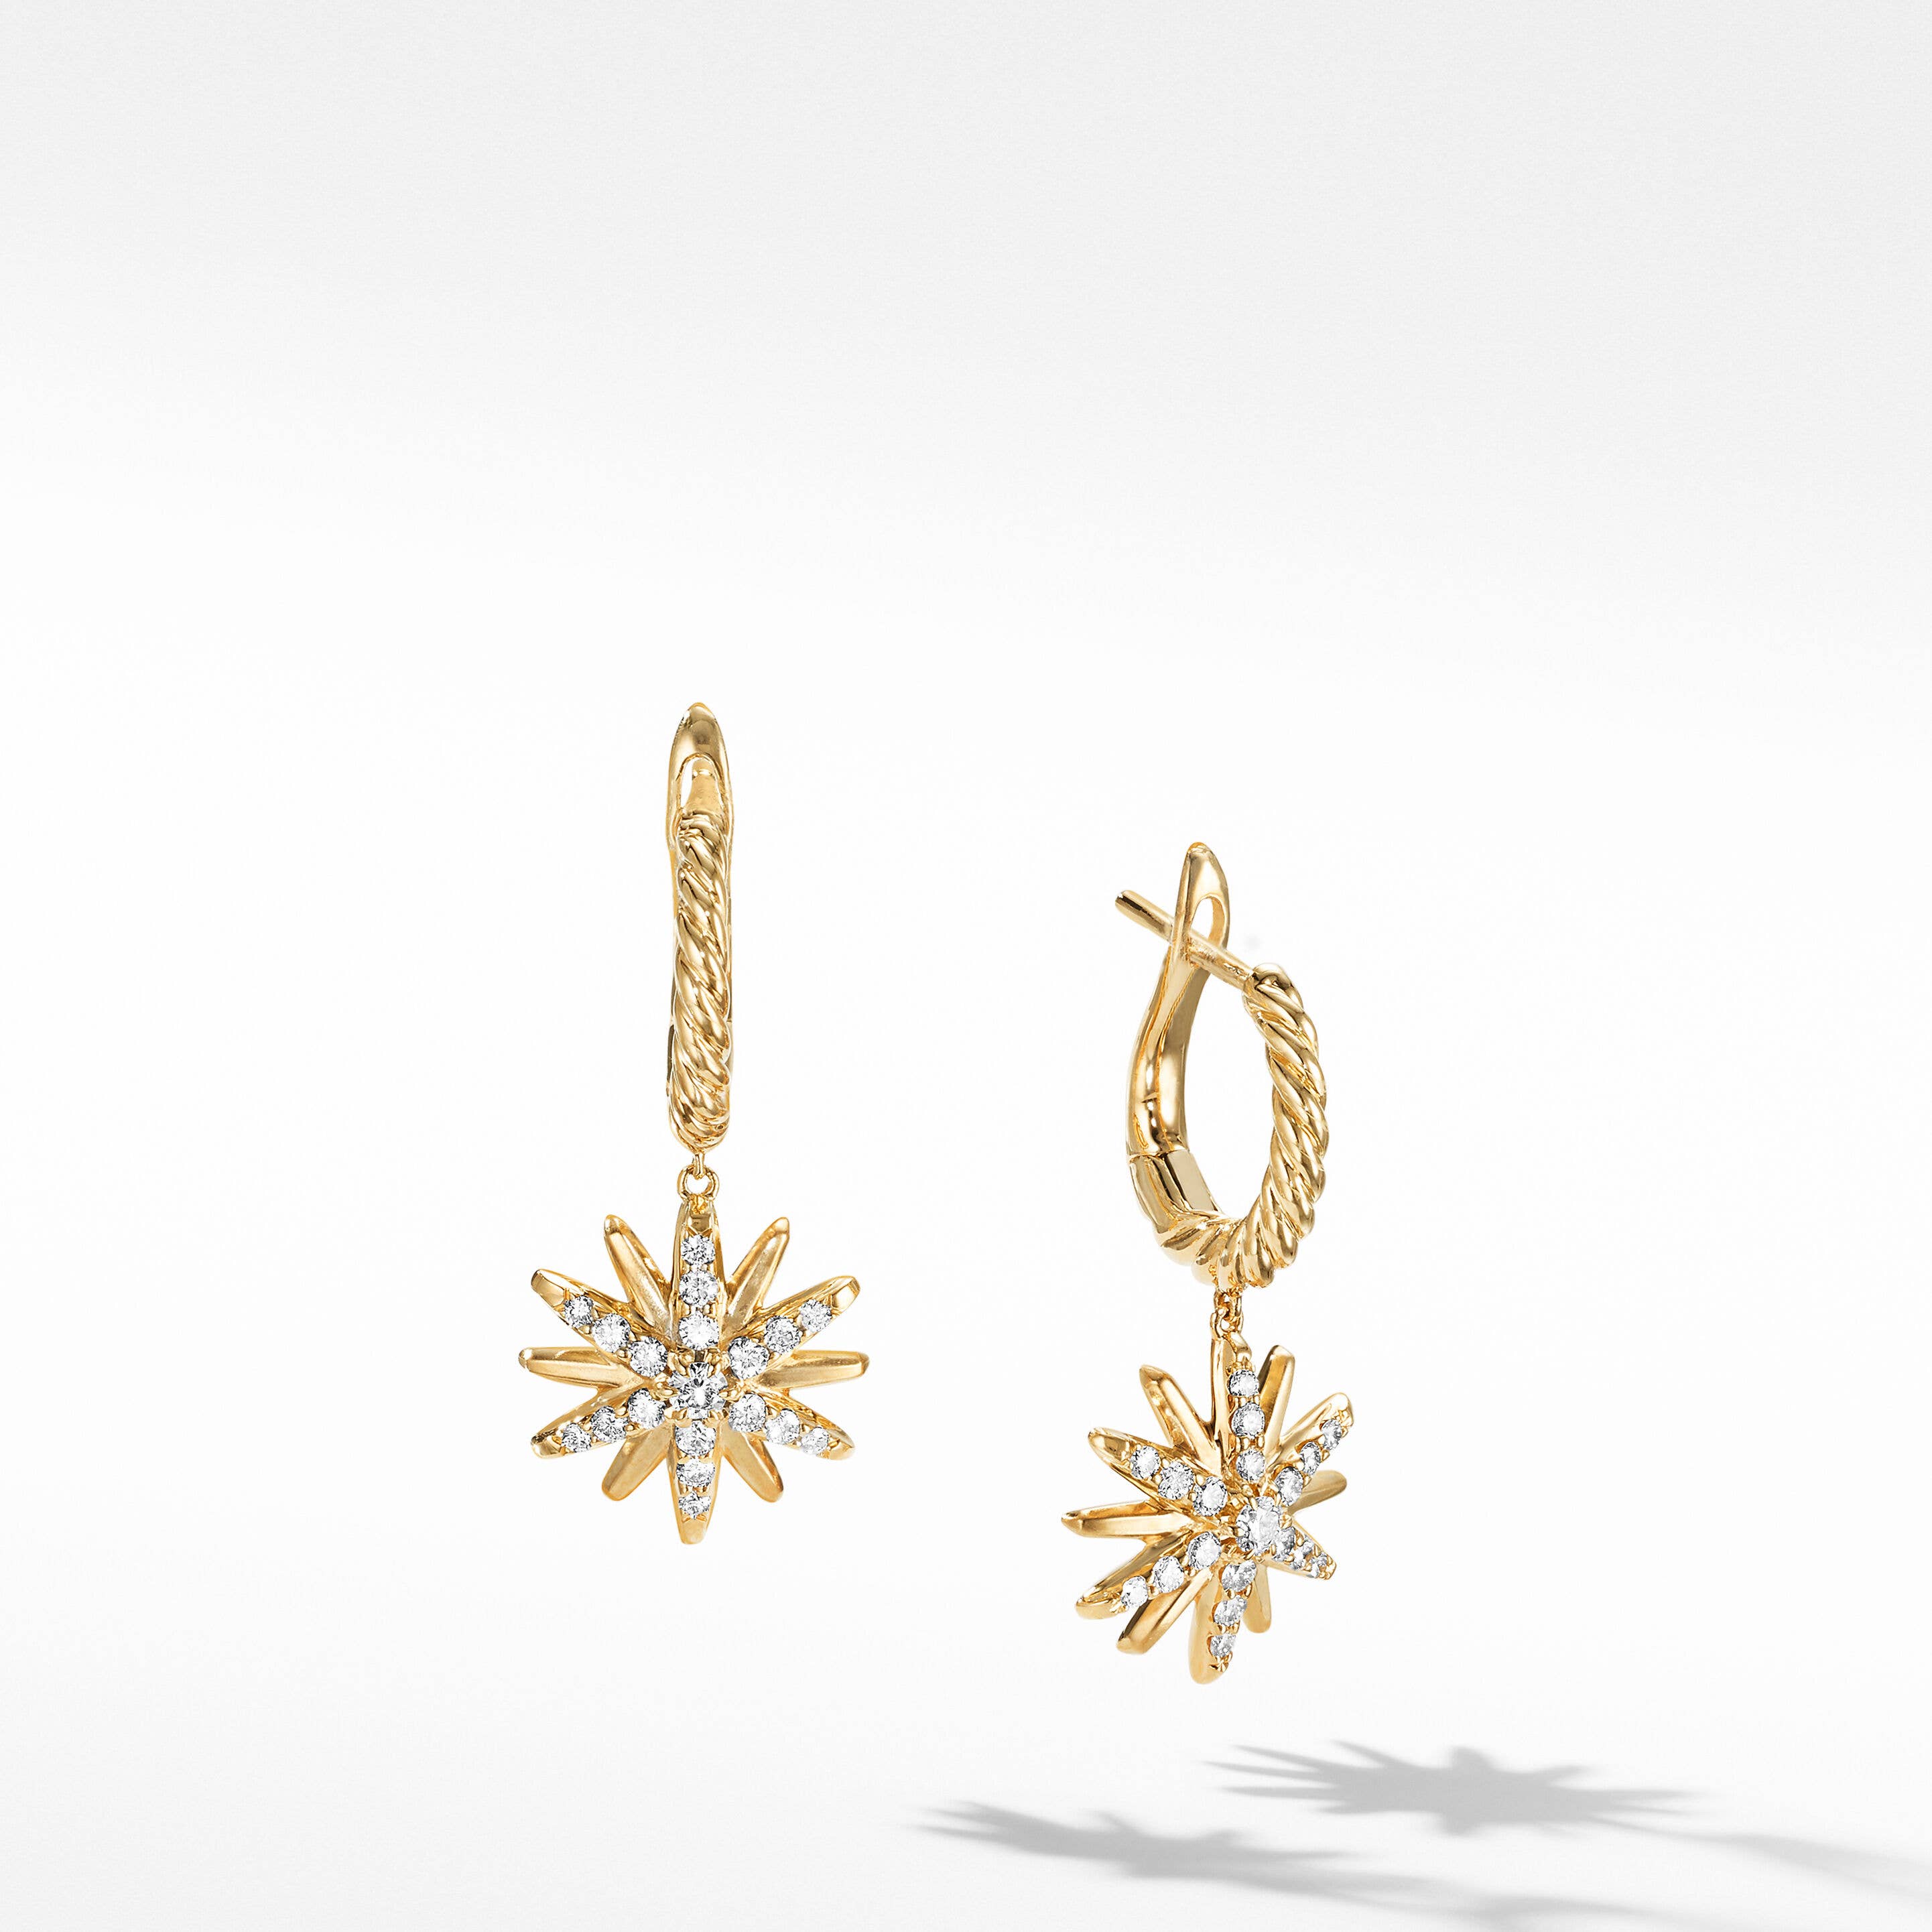 Starburst Drop Earrings in 18ct Yellow Gold with Pavé Diamonds